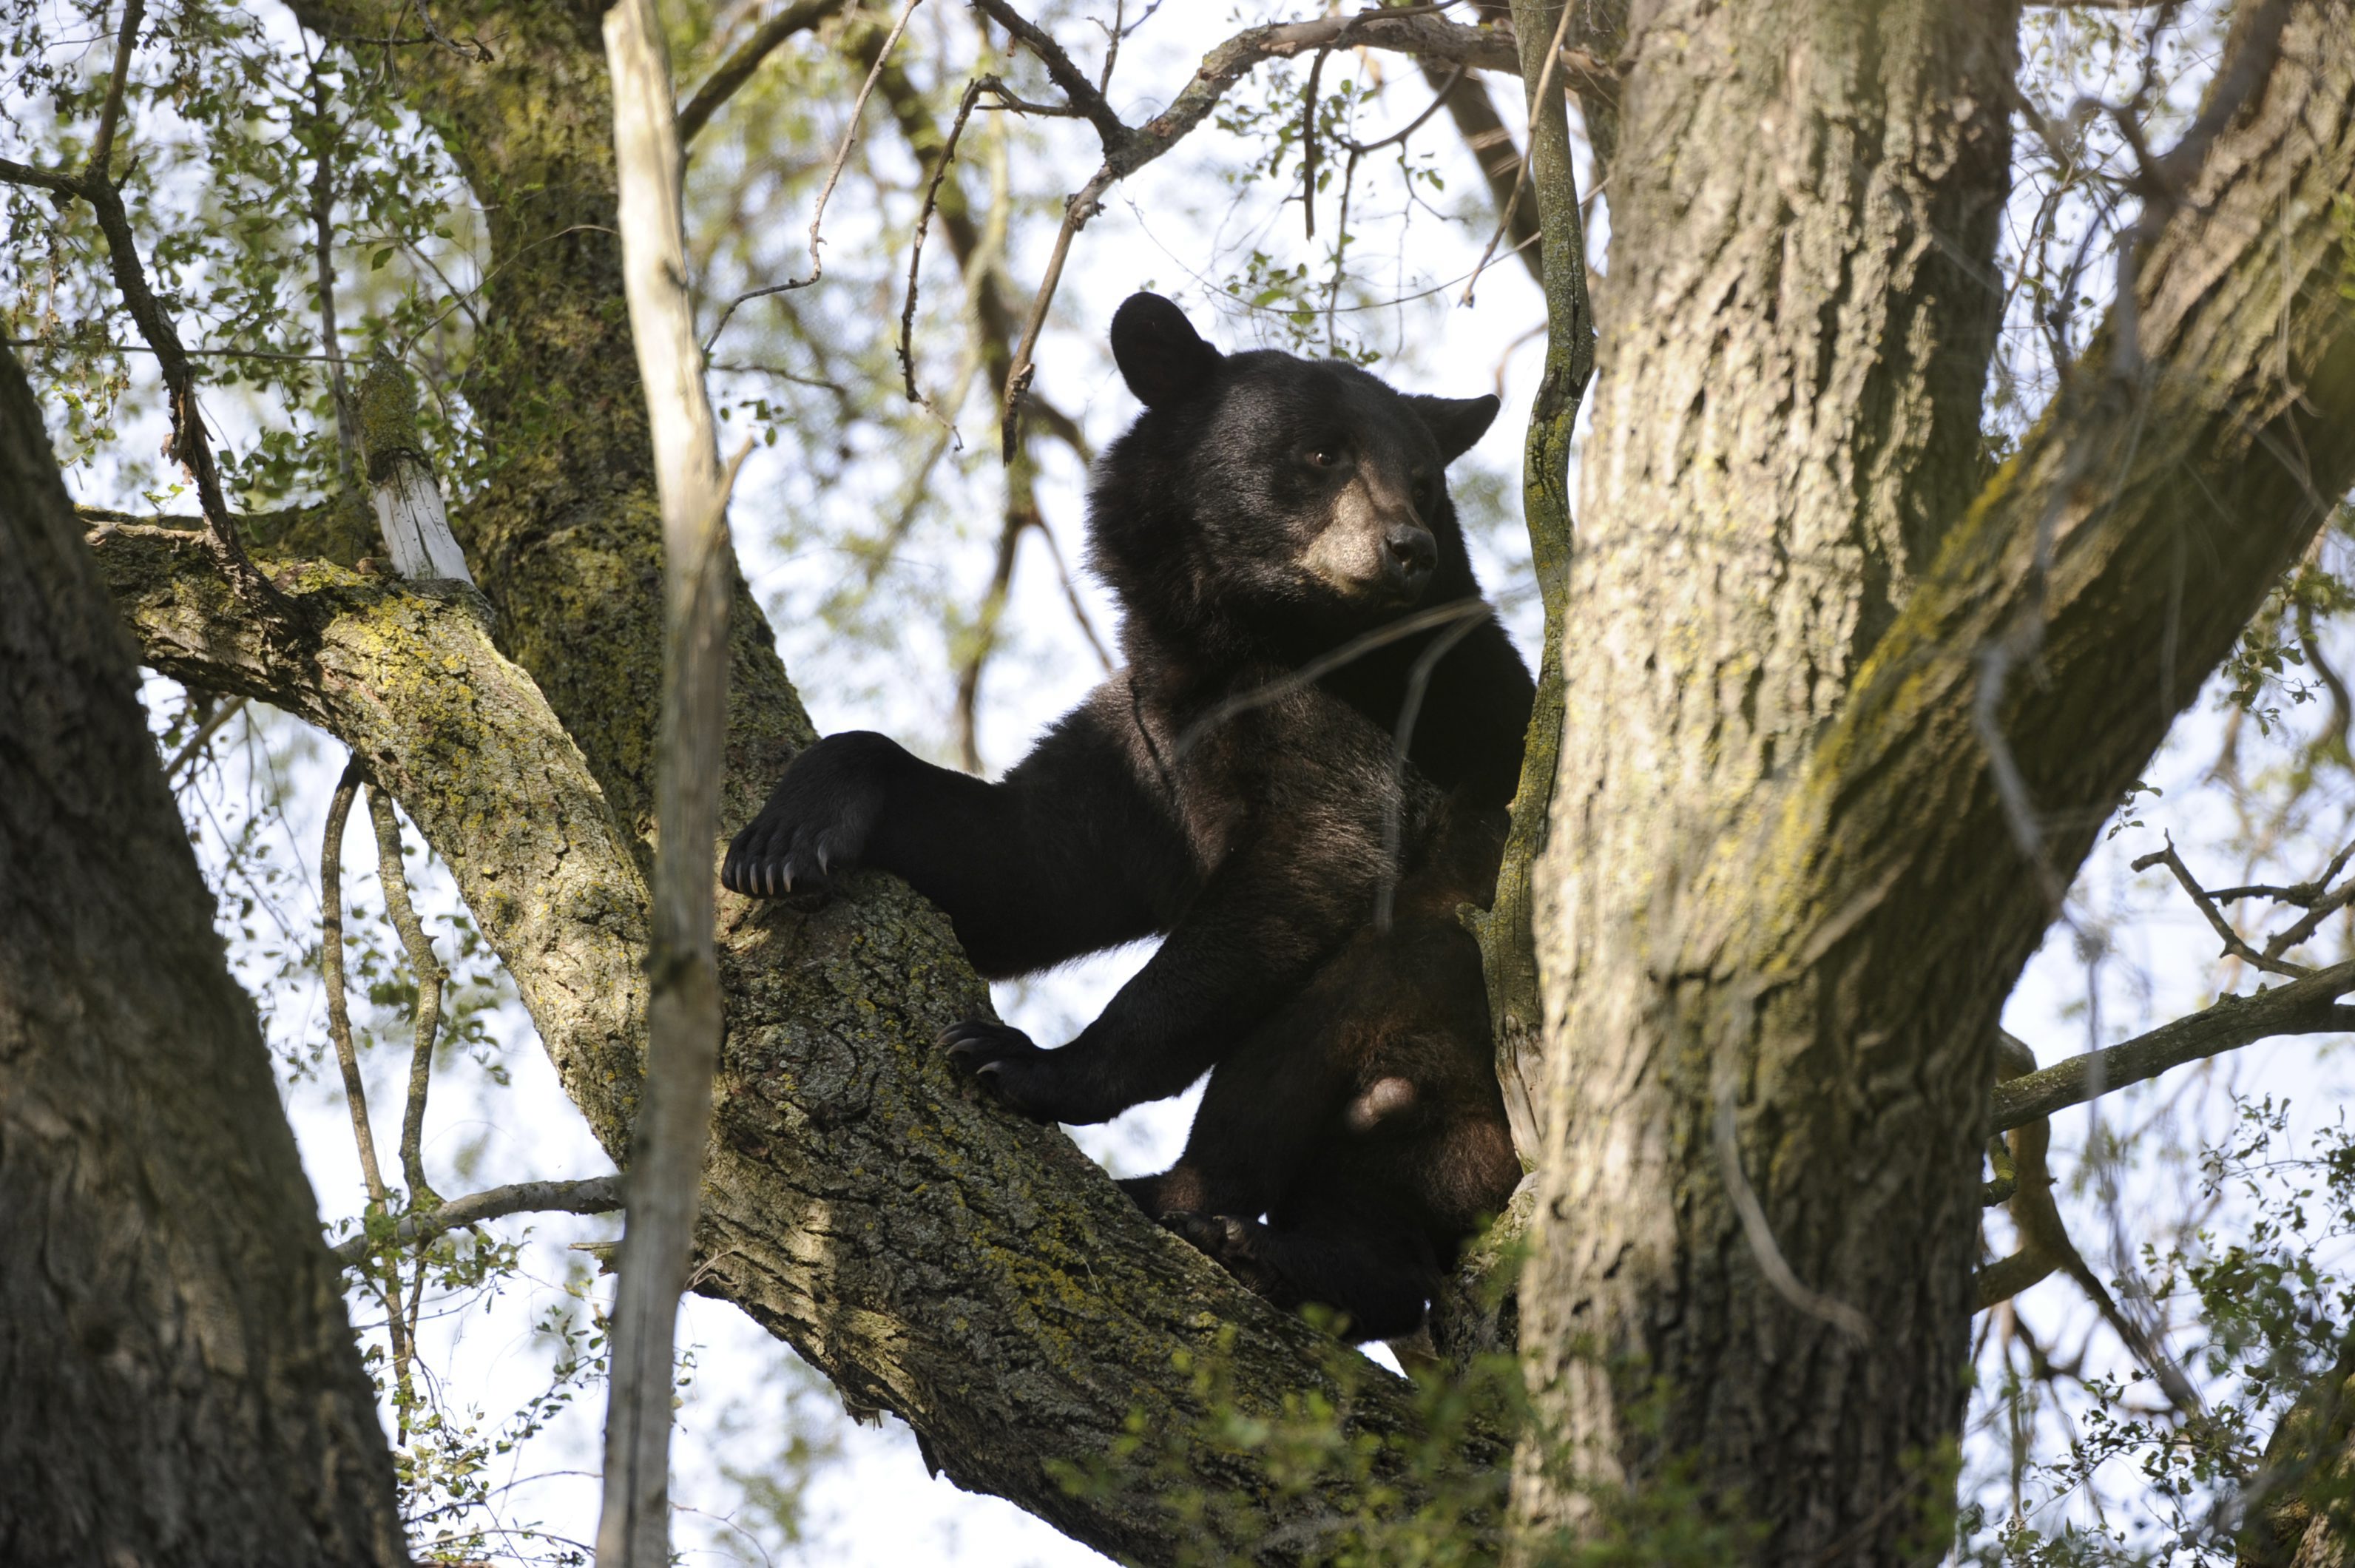 Ontario’s black bears are already waking up. Here’s how to help them in a warm winter